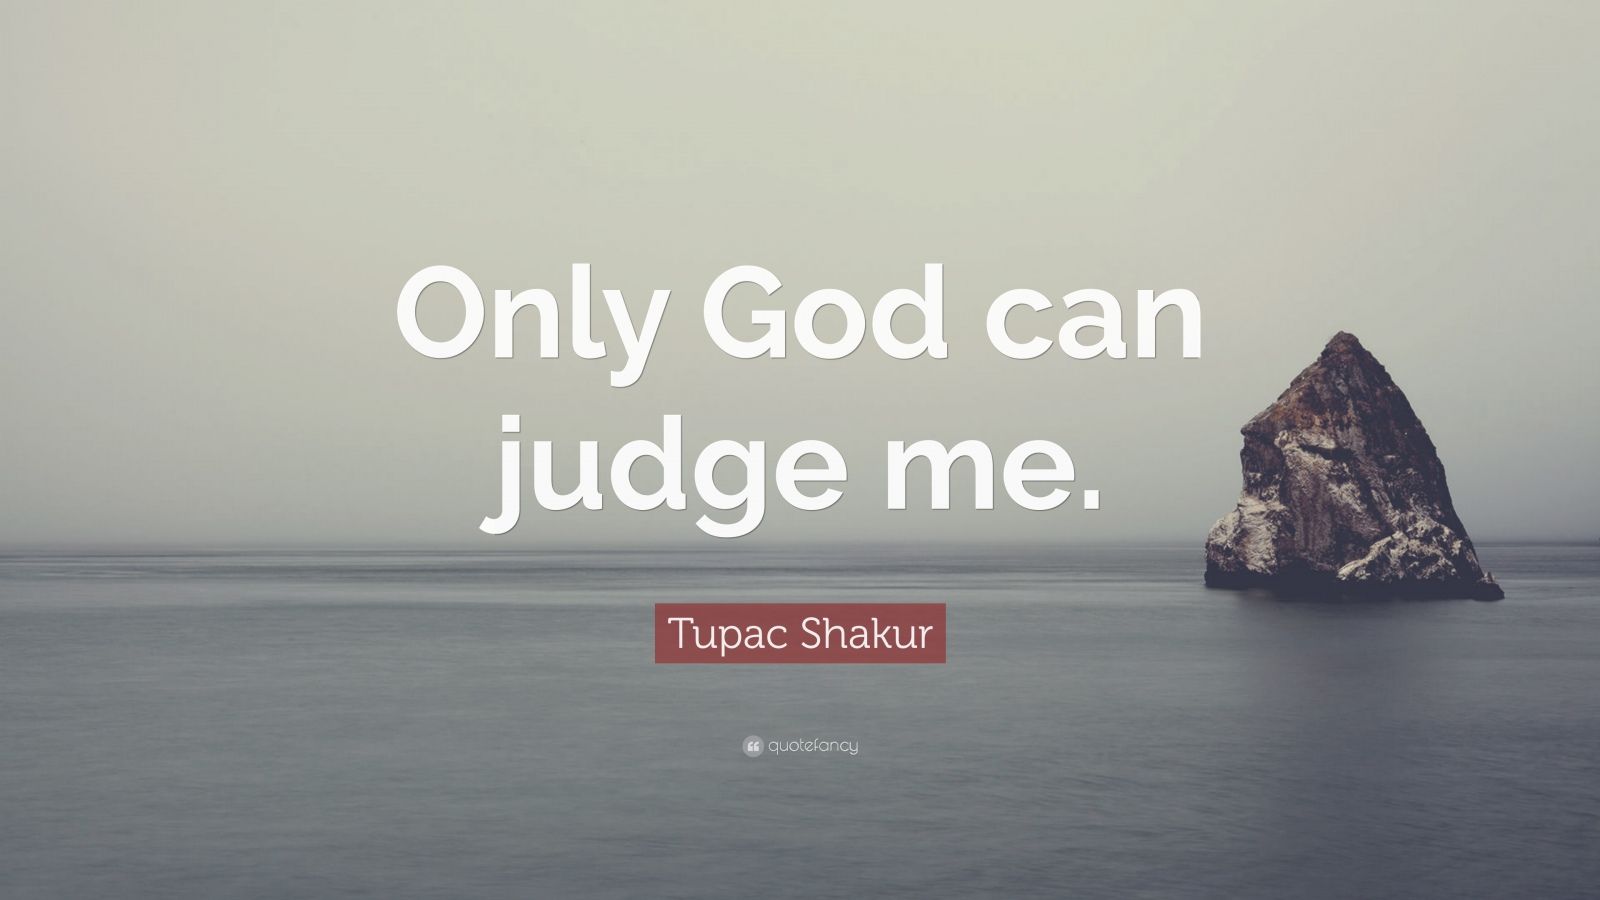 Tupac Shakur Quote: “Only God can judge me.” (12 wallpapers) - Quotefancy